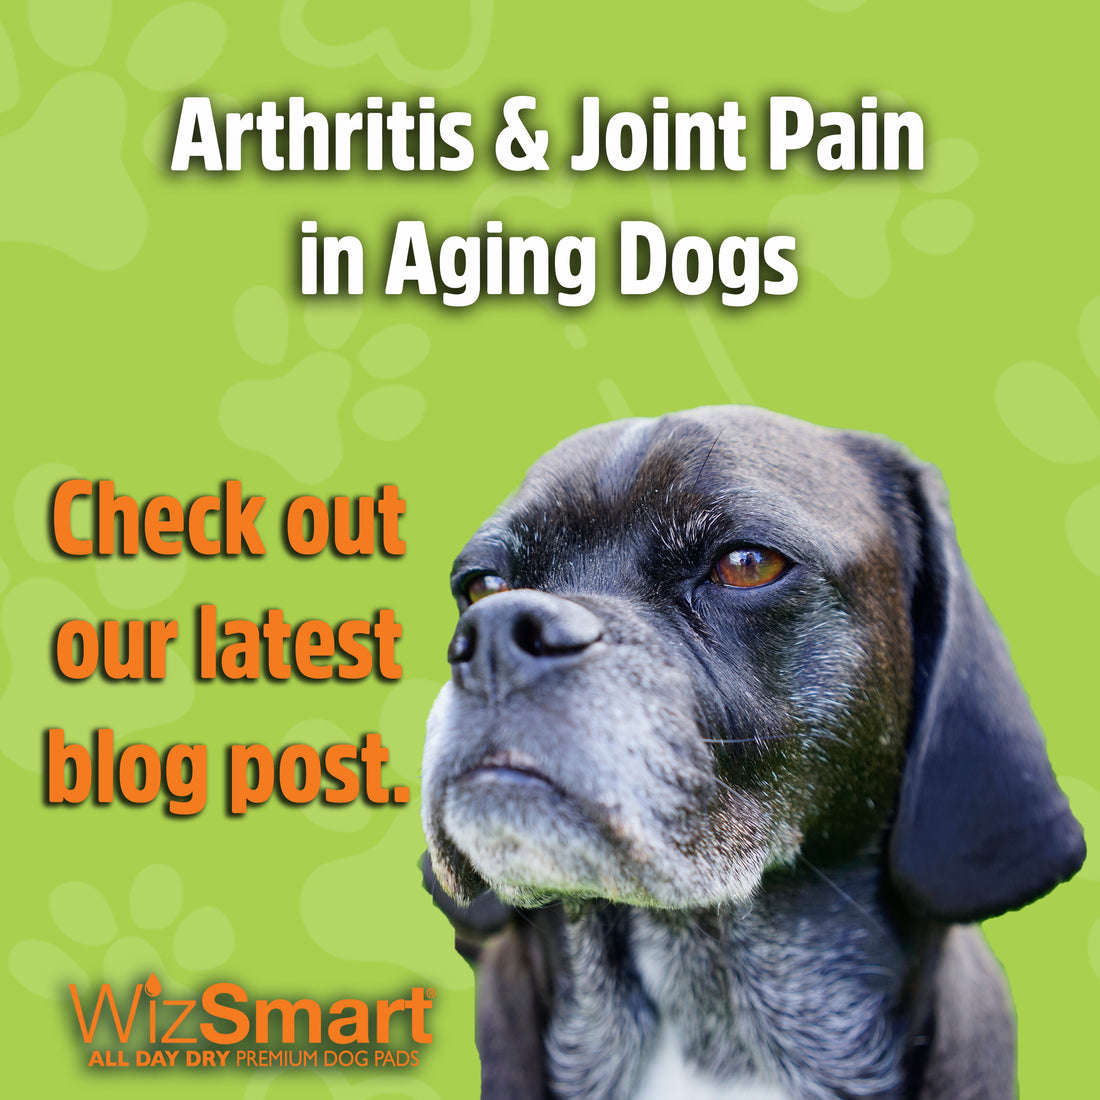 Arthritis & Joint Pain in Aging Dogs